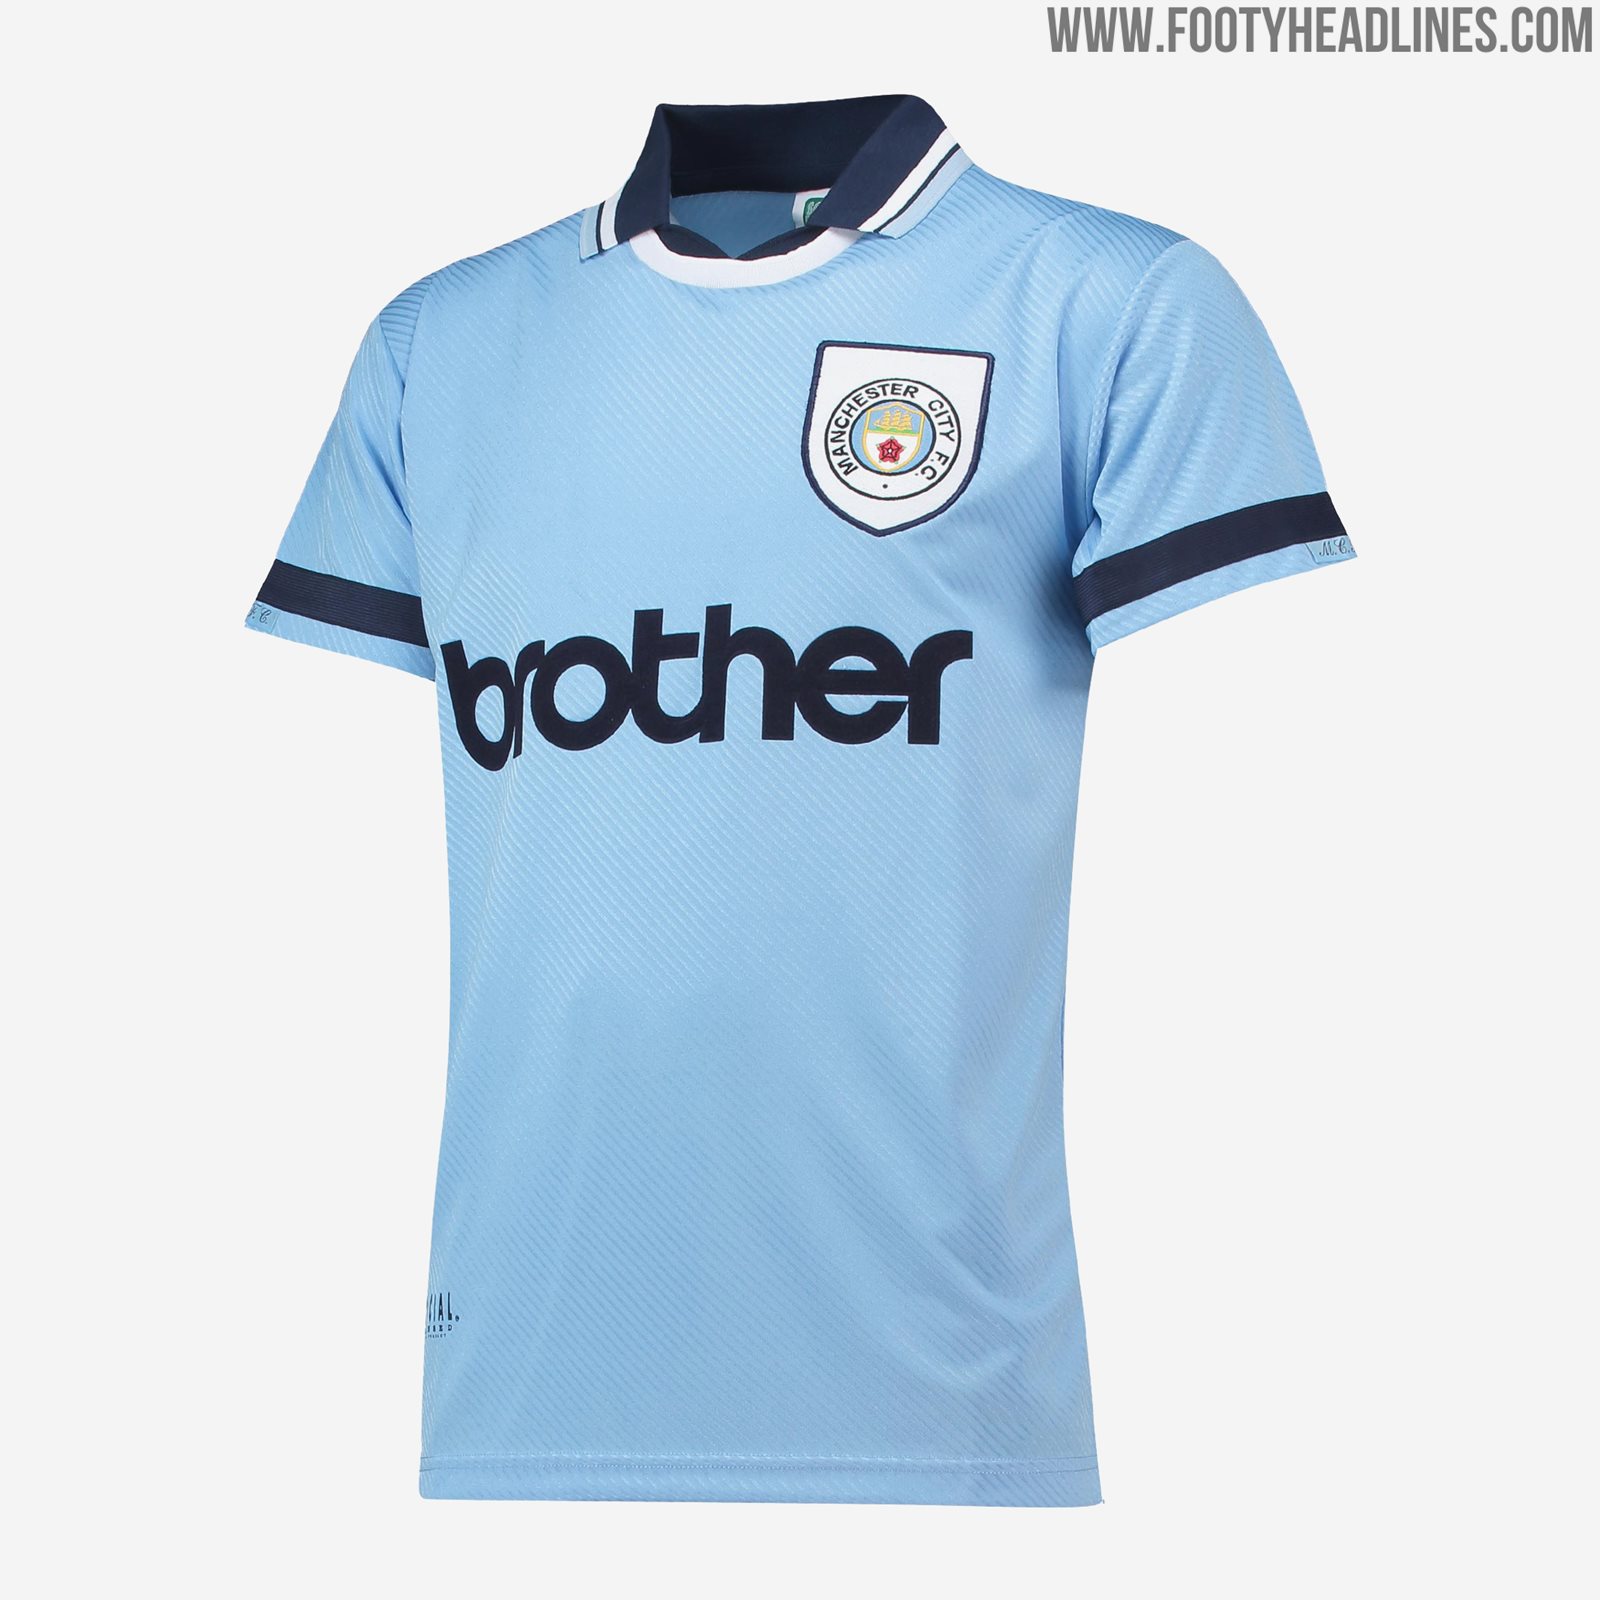 Class - 11 Manchester City Retro Kits Launched - Closer Look - Footy Headlines